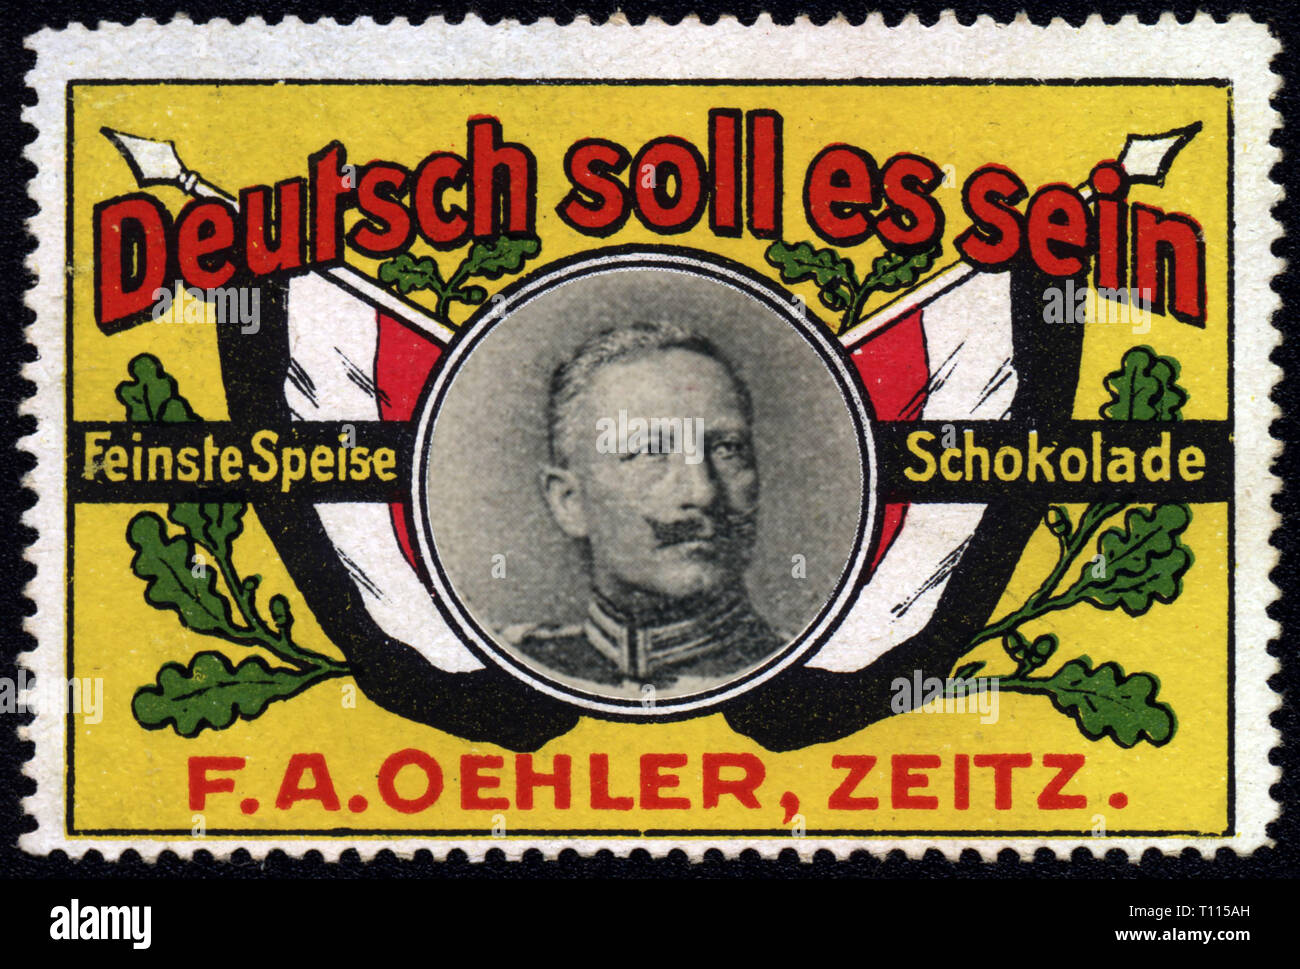 advertising, poster stamps, 'Deutsch soll es sein' (It Should Be German), F.A. Oehler, Zeitz, 1900s, Additional-Rights-Clearance-Info-Not-Available Stock Photo